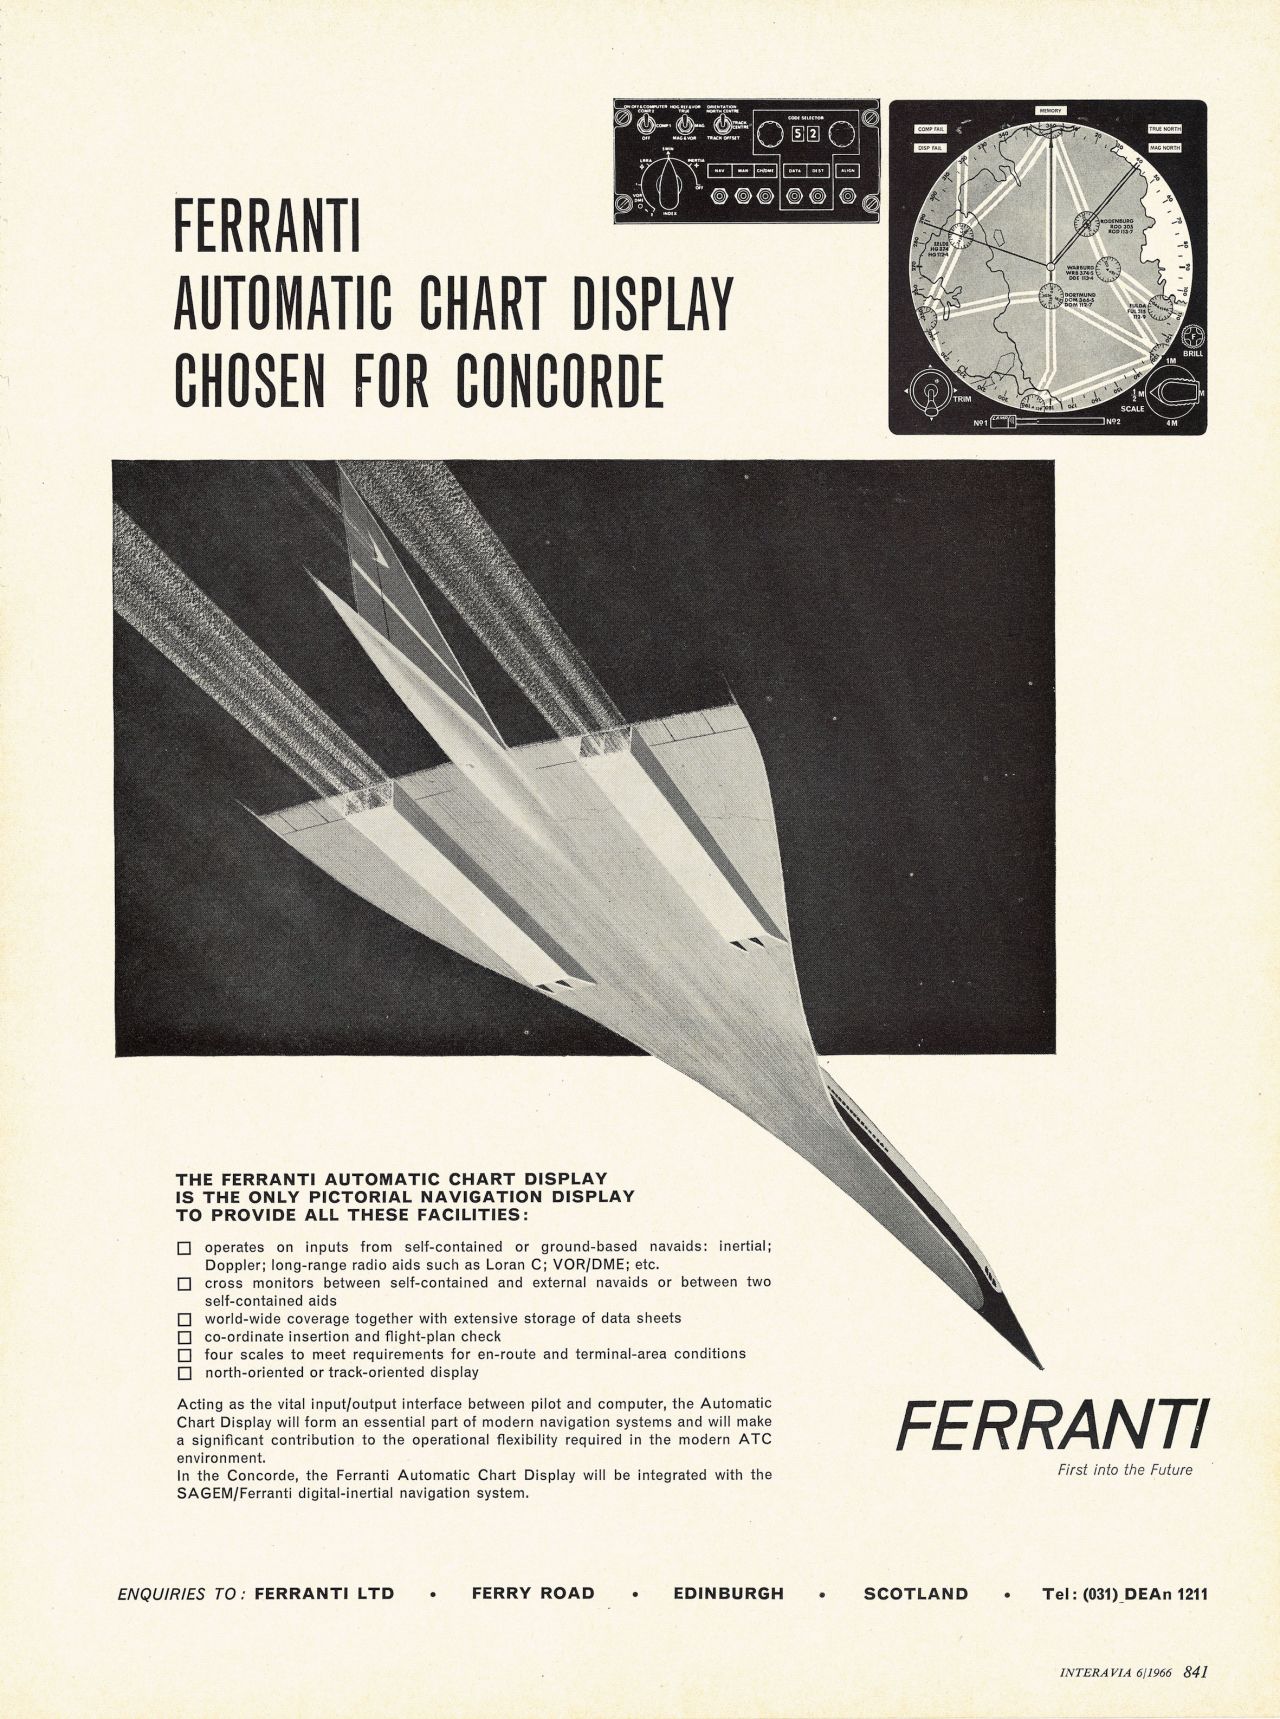 Companies who worked for or supplied Concorde used it in their ads. This is a Ferranti Concorde engagement advertisement from 1966.